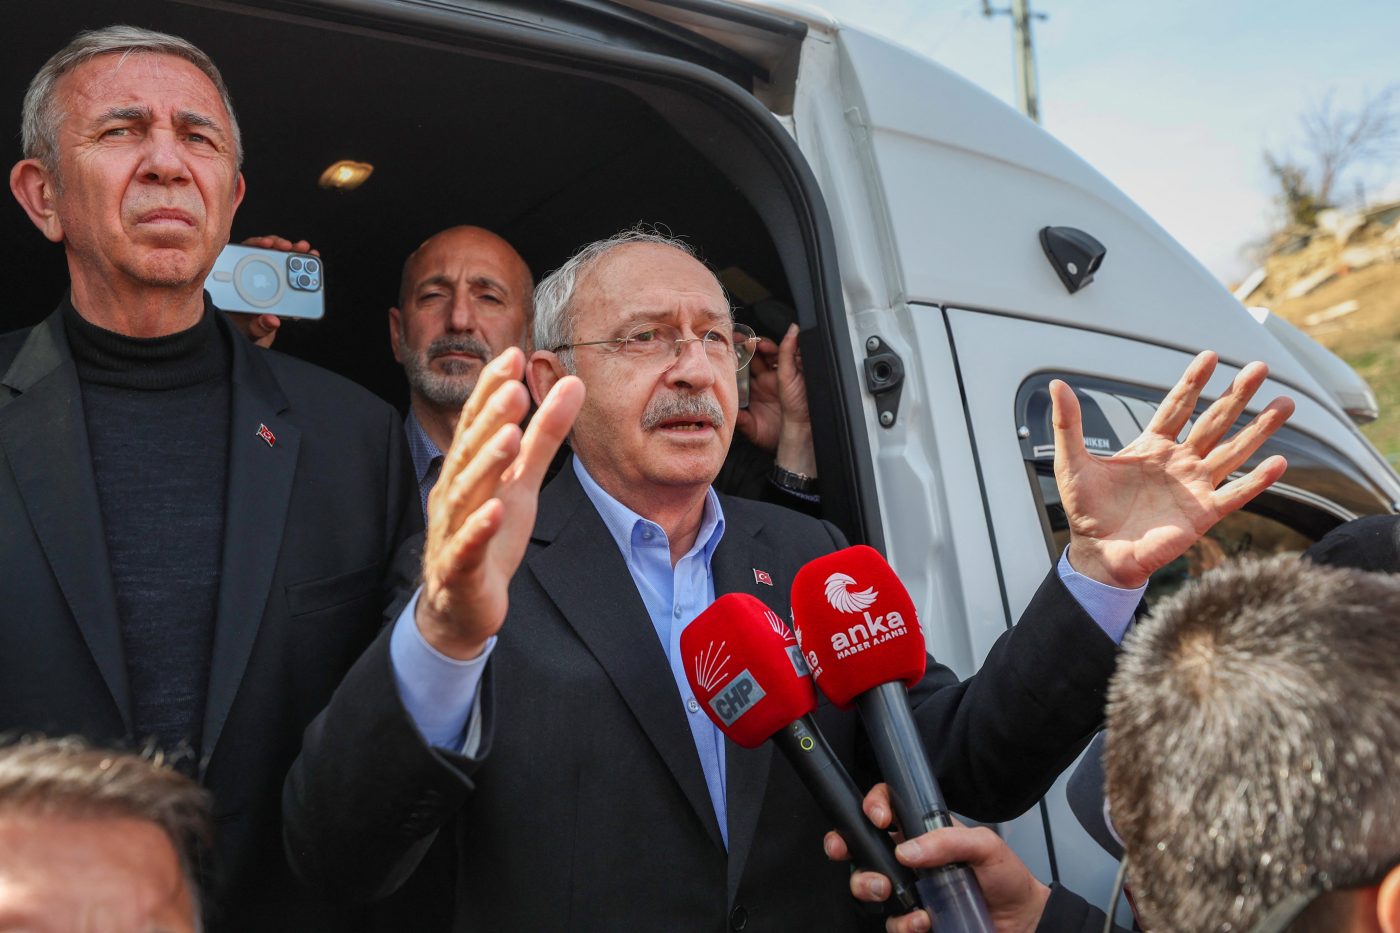 Photo: Kemal Kilicdaroglu, leader of Republican People's Party (CHP) and presidential candidate of the six-party main opposition alliance, accompanied by Ankara Mayor Mansur Yasa, talks to media as he visits earthquake-hit Kahramanmaras province, Turkey March 11, 2023. Credit: Alp Eren Kaya/Republican People's Party/Handout via REUTERS